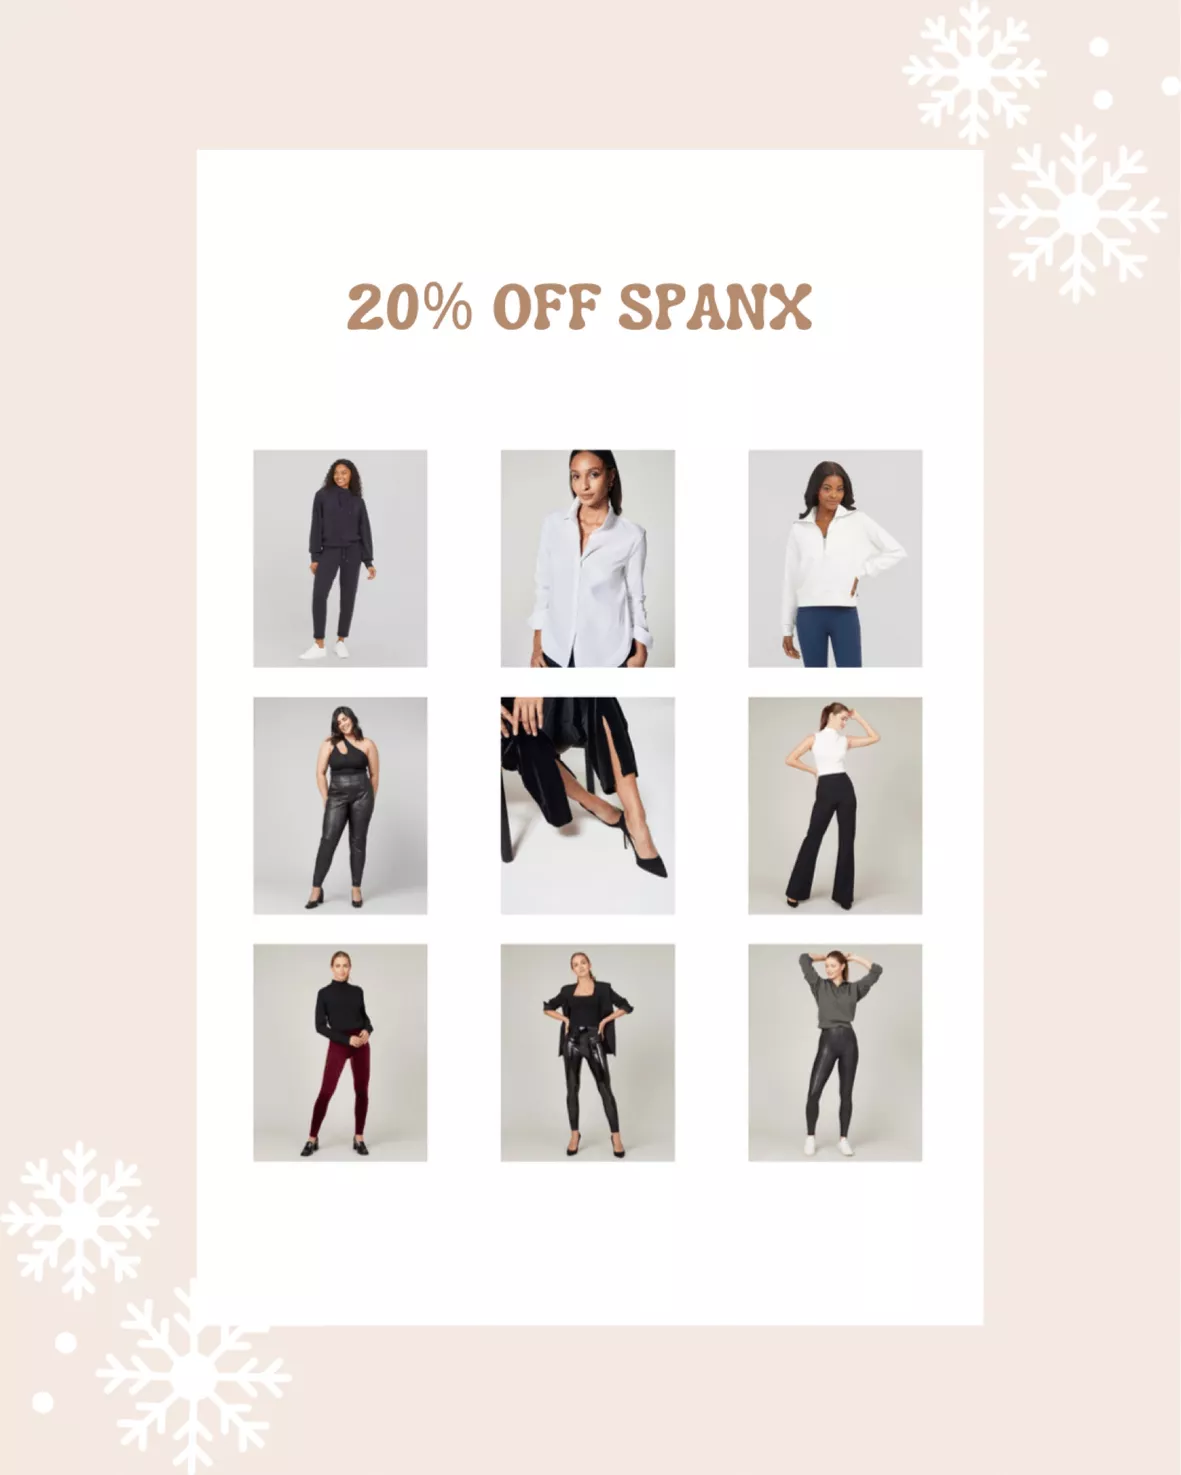 SPANX® AirEssentials Tapered Pants curated on LTK